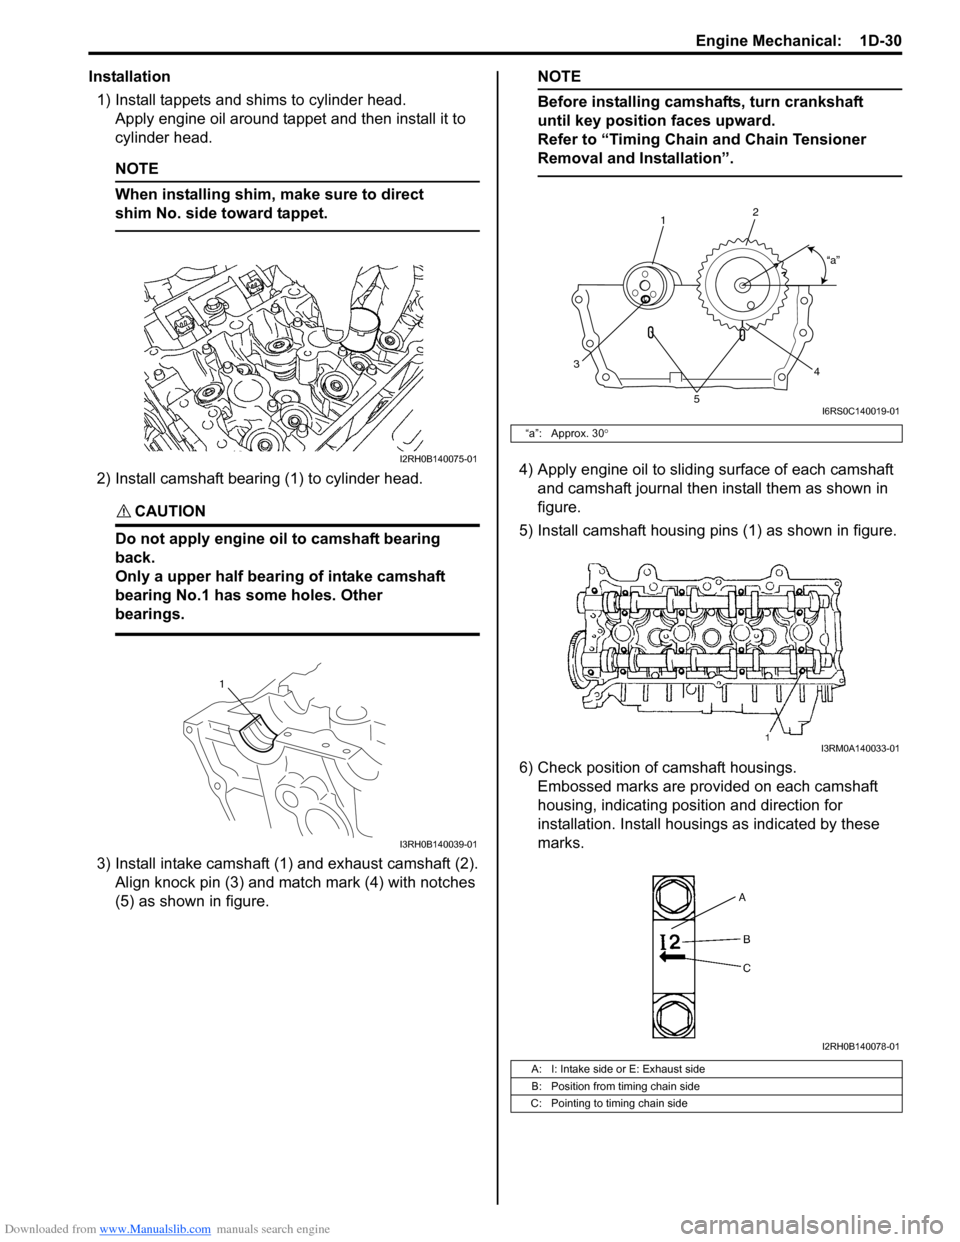 SUZUKI SWIFT 2008 2.G Service Owners Guide Downloaded from www.Manualslib.com manuals search engine Engine Mechanical:  1D-30
Installation1) Install tappets and shims to cylinder head. Apply engine oil around tappet and then install it to 
cyl